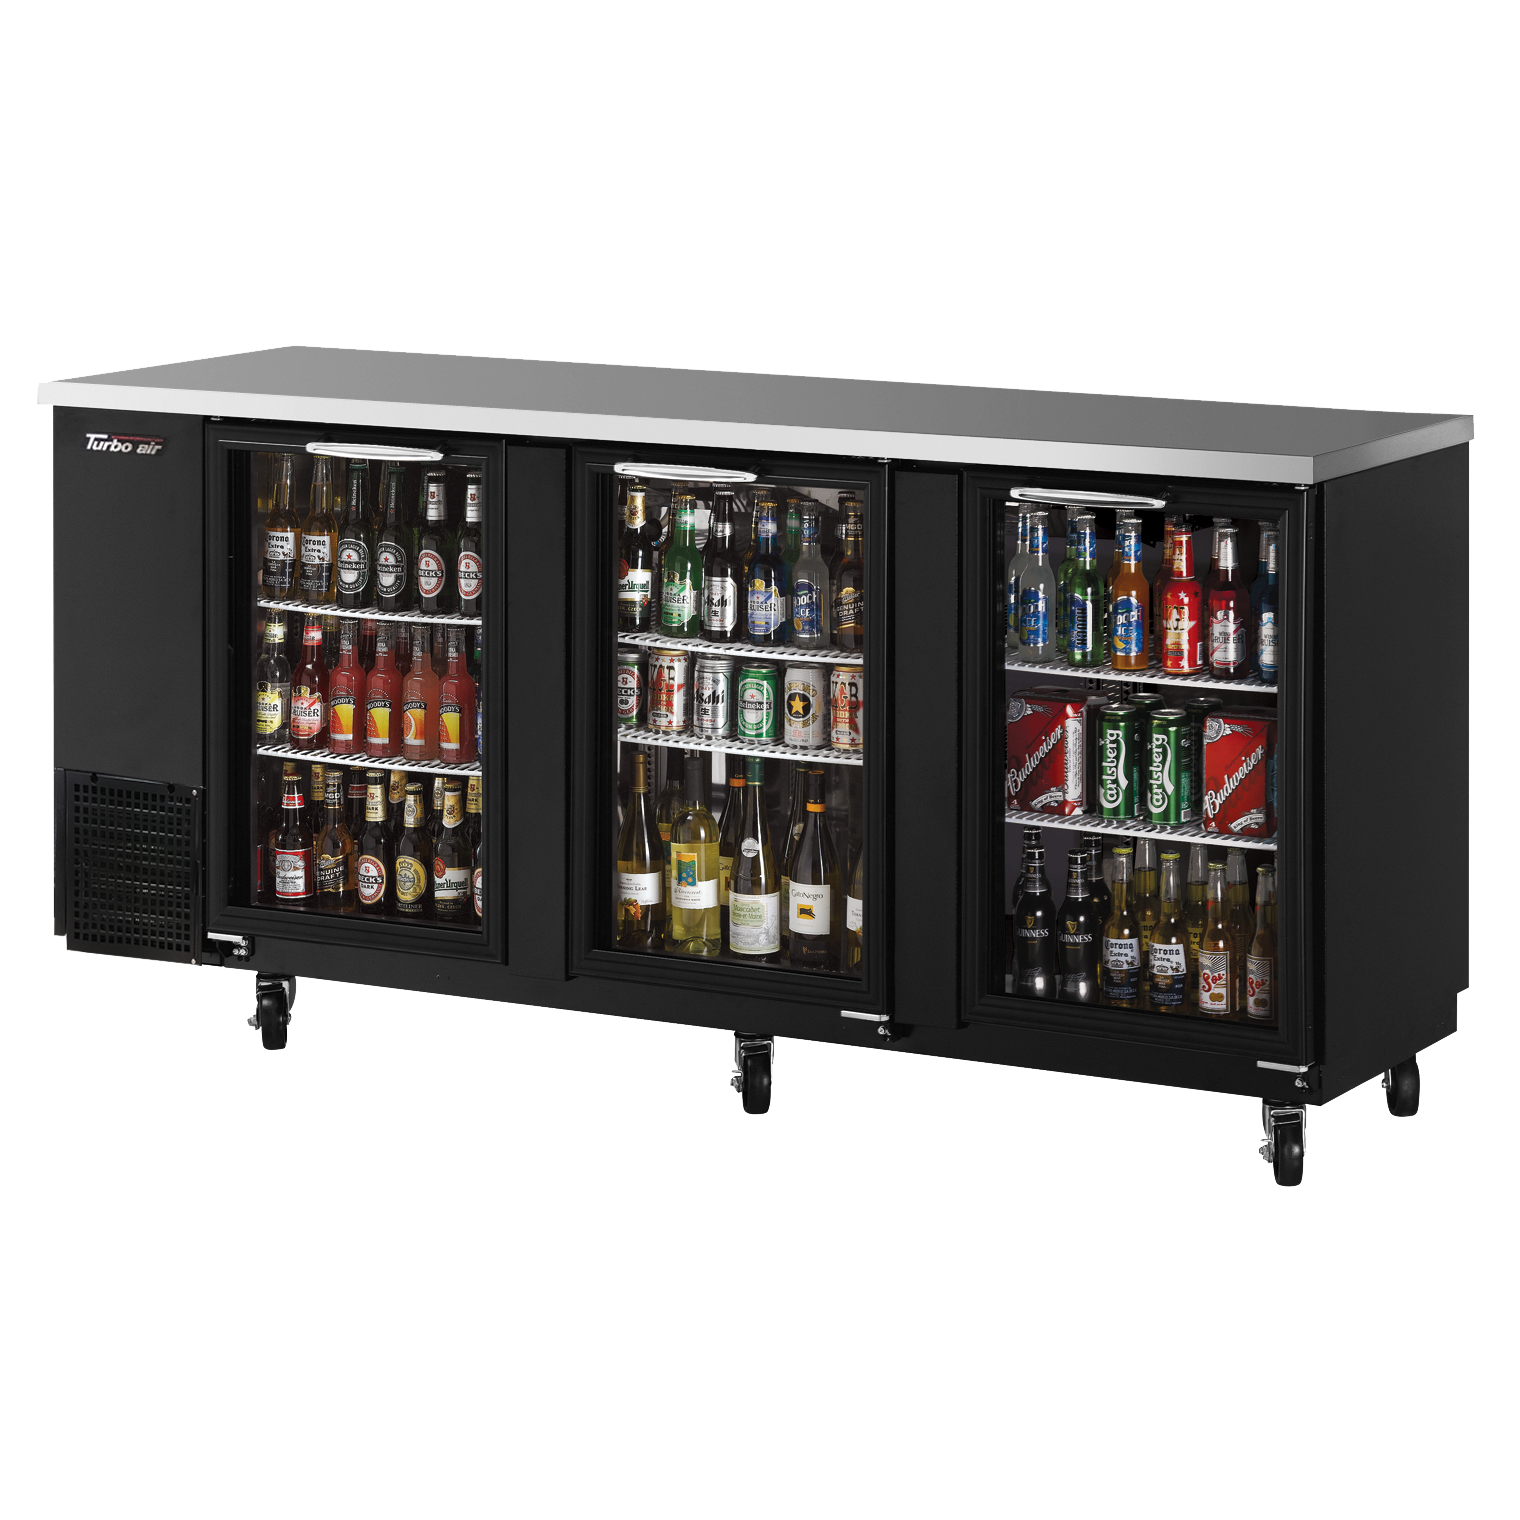 superior-equipment-supply - Turbo Air - Turbo Air Black Vinyl Coated Steel Three Section Narrow Back Bar Cooler With Glass Doors